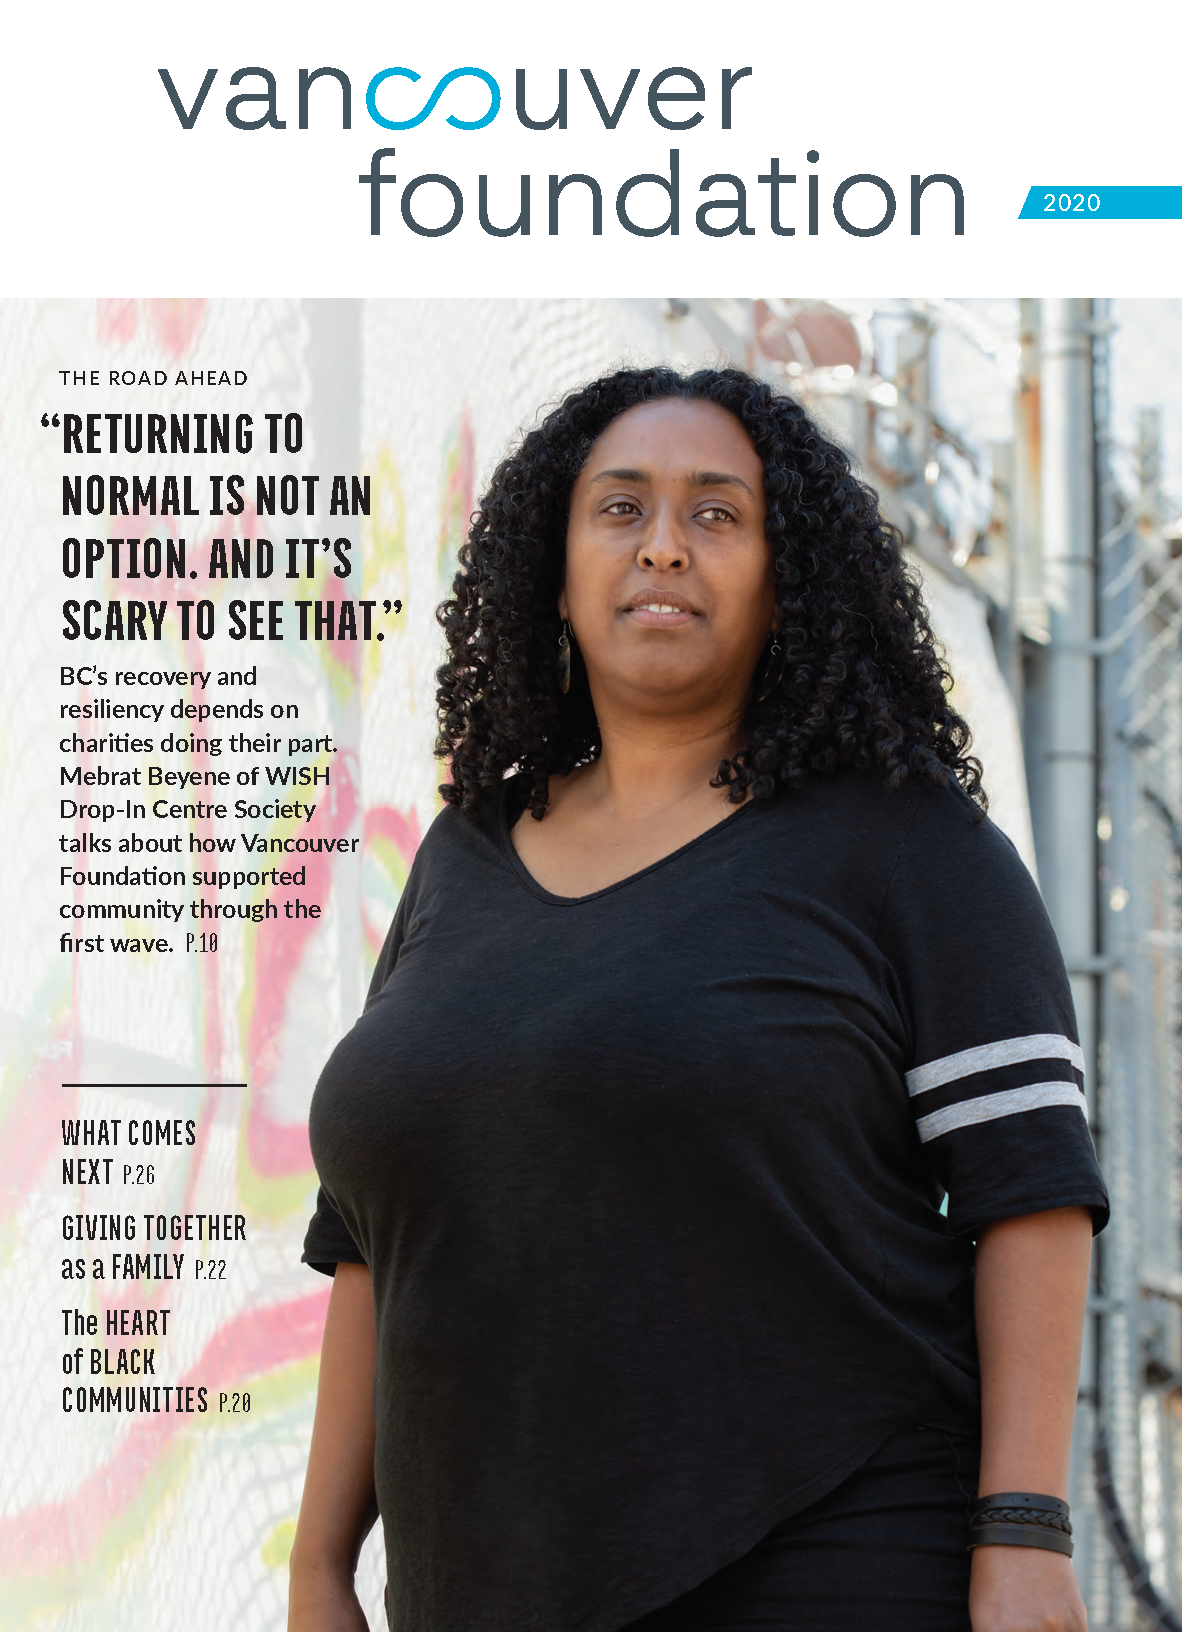 2020 Vancouver Foundation cover featuring Mebrat Beyane, who has dark skin and shoulder-length curly hair, standing in a black T-shirt. 